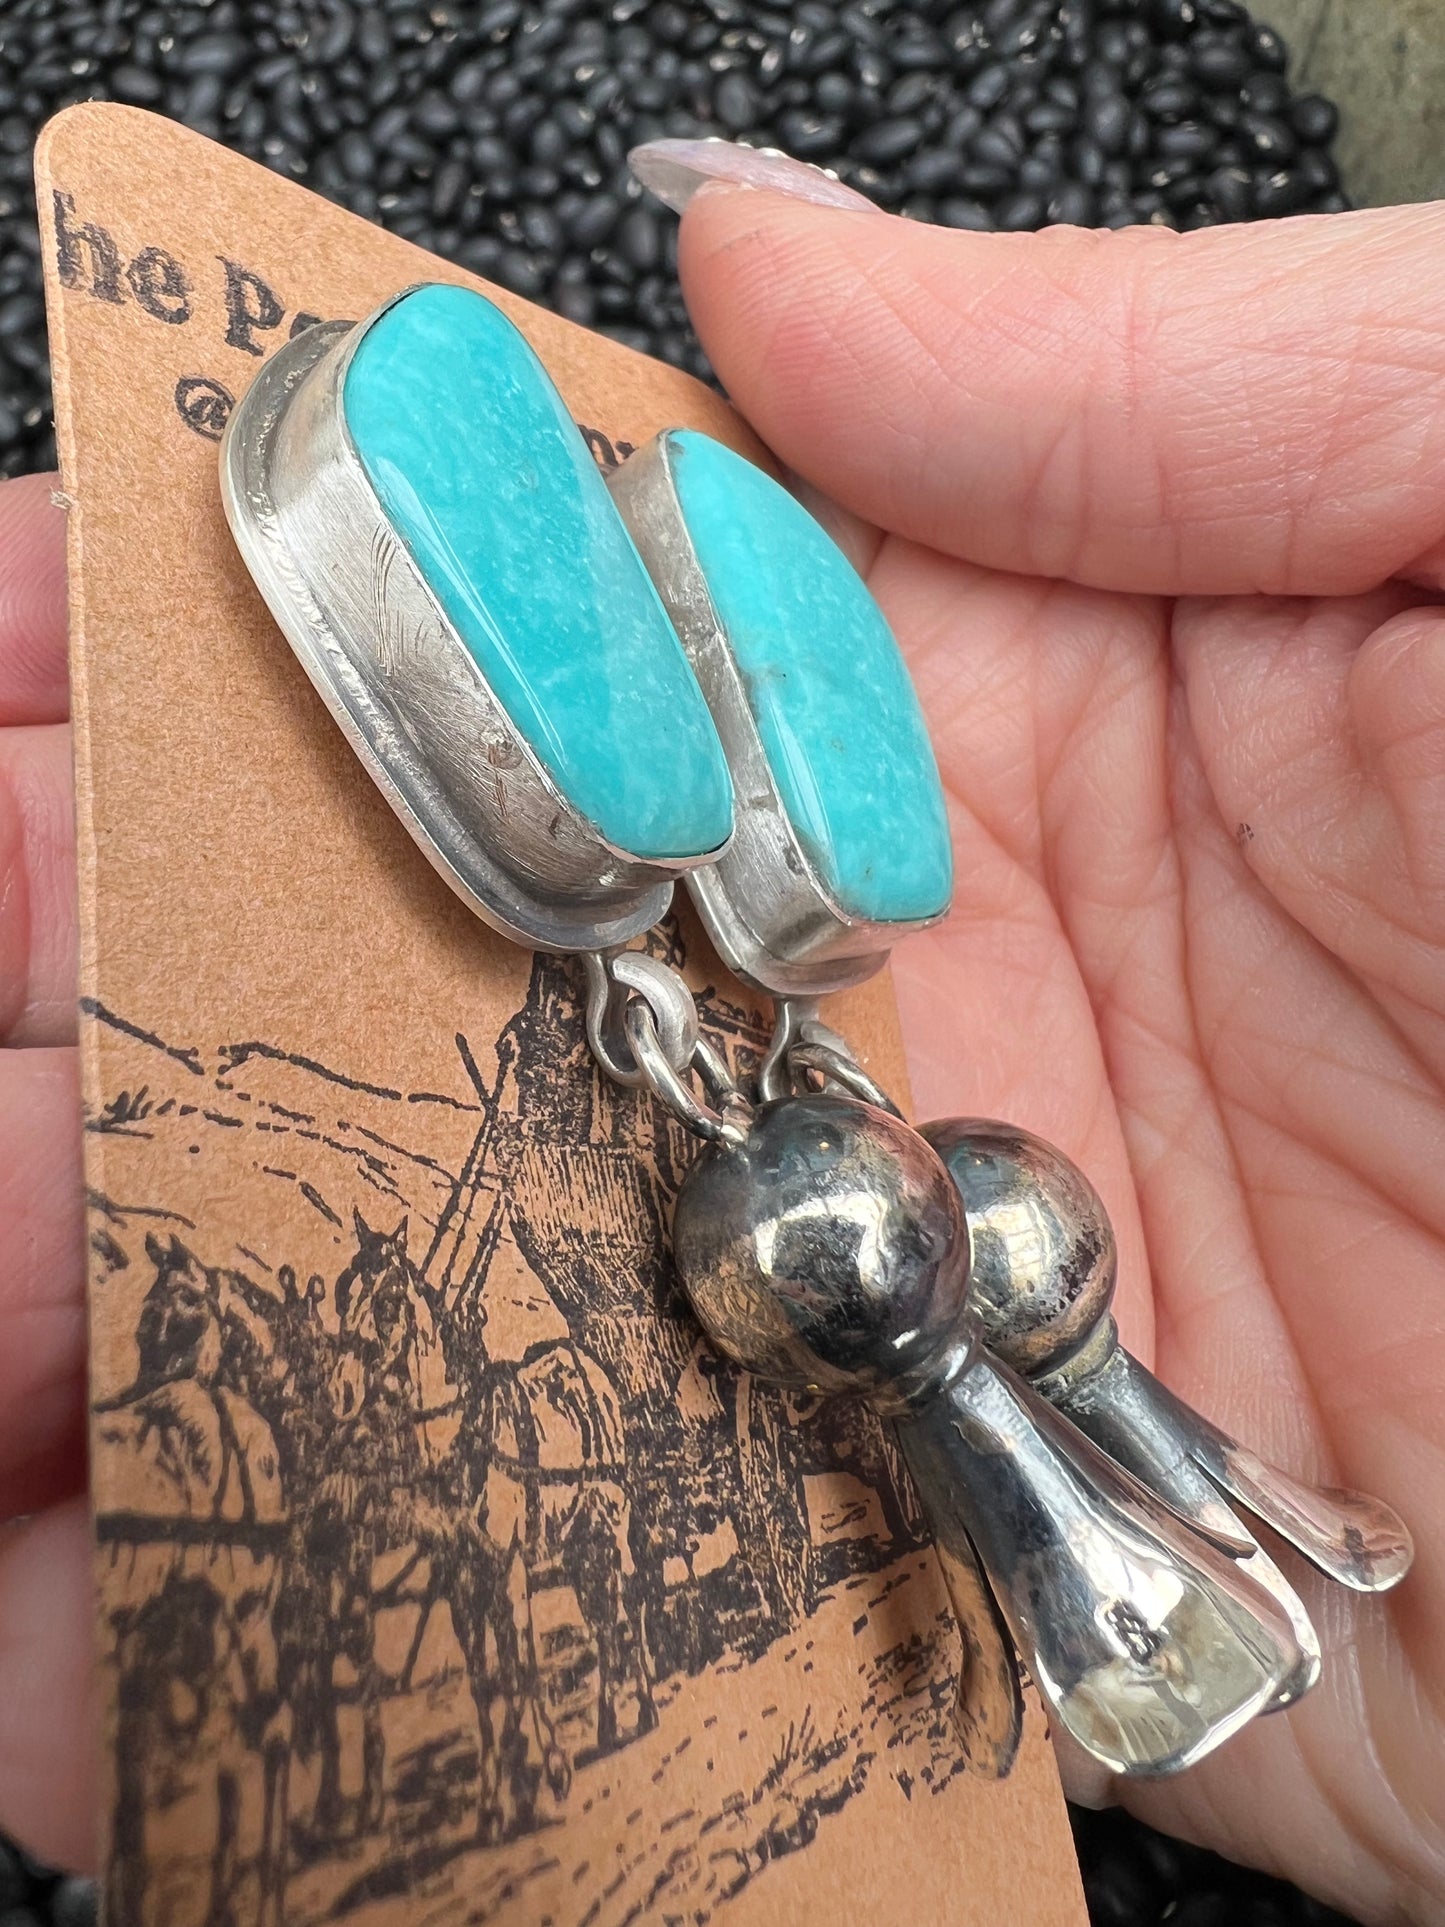 Large Turquoise earrings with squash blossom pendant dangles